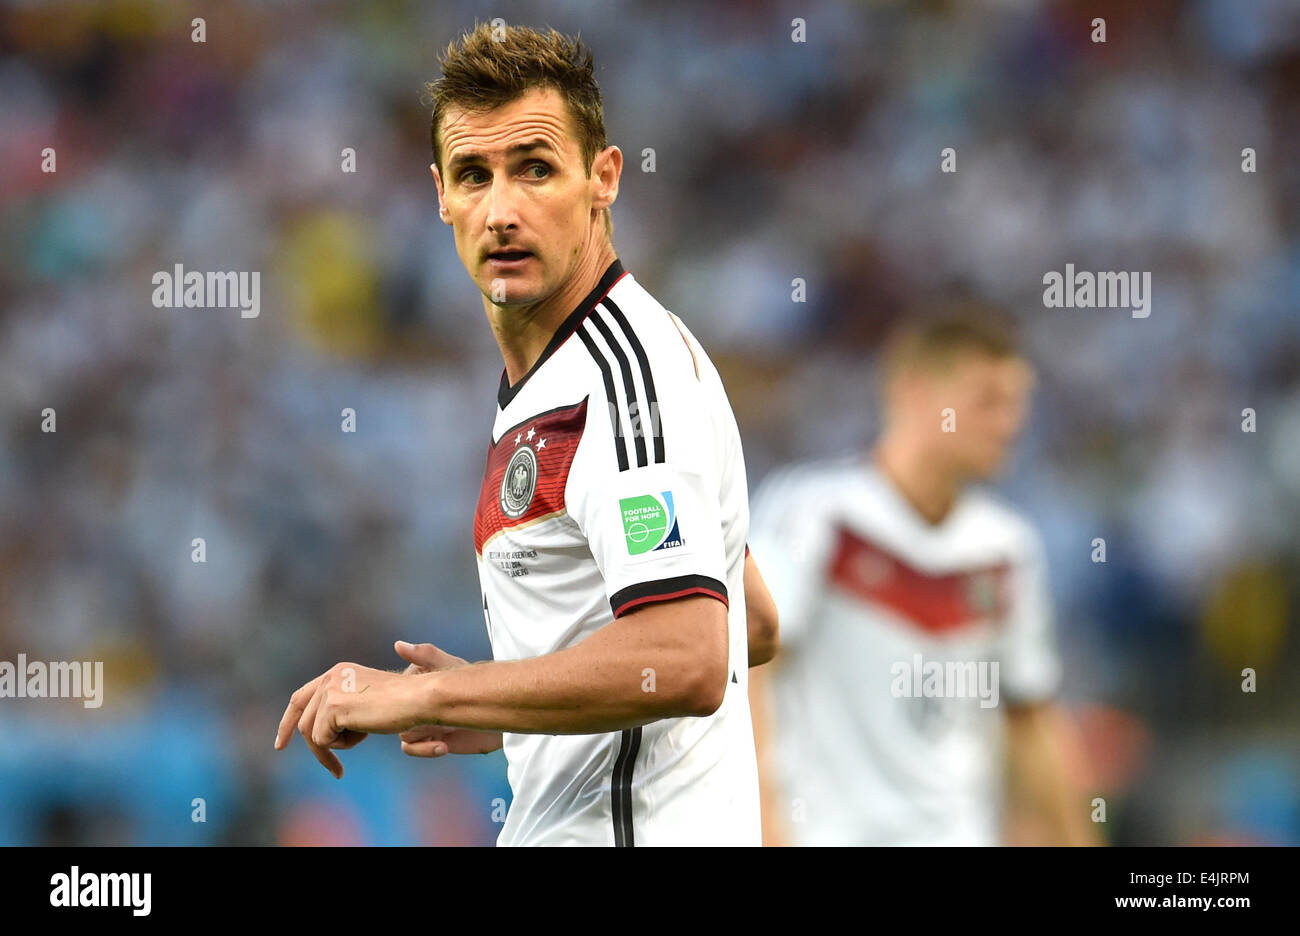 Rio de Janeiro, Brazil. 13th July, 2014. Miroslav Klose of Germany reacts during the FIFA World Cup 2014 final soccer match between Germany and Argentina at the Estadio do Maracana in Rio de Janeiro, Brazil, 13 July 2014. Photo: Andreas Gebert/dpa/Alamy Live News Stock Photo